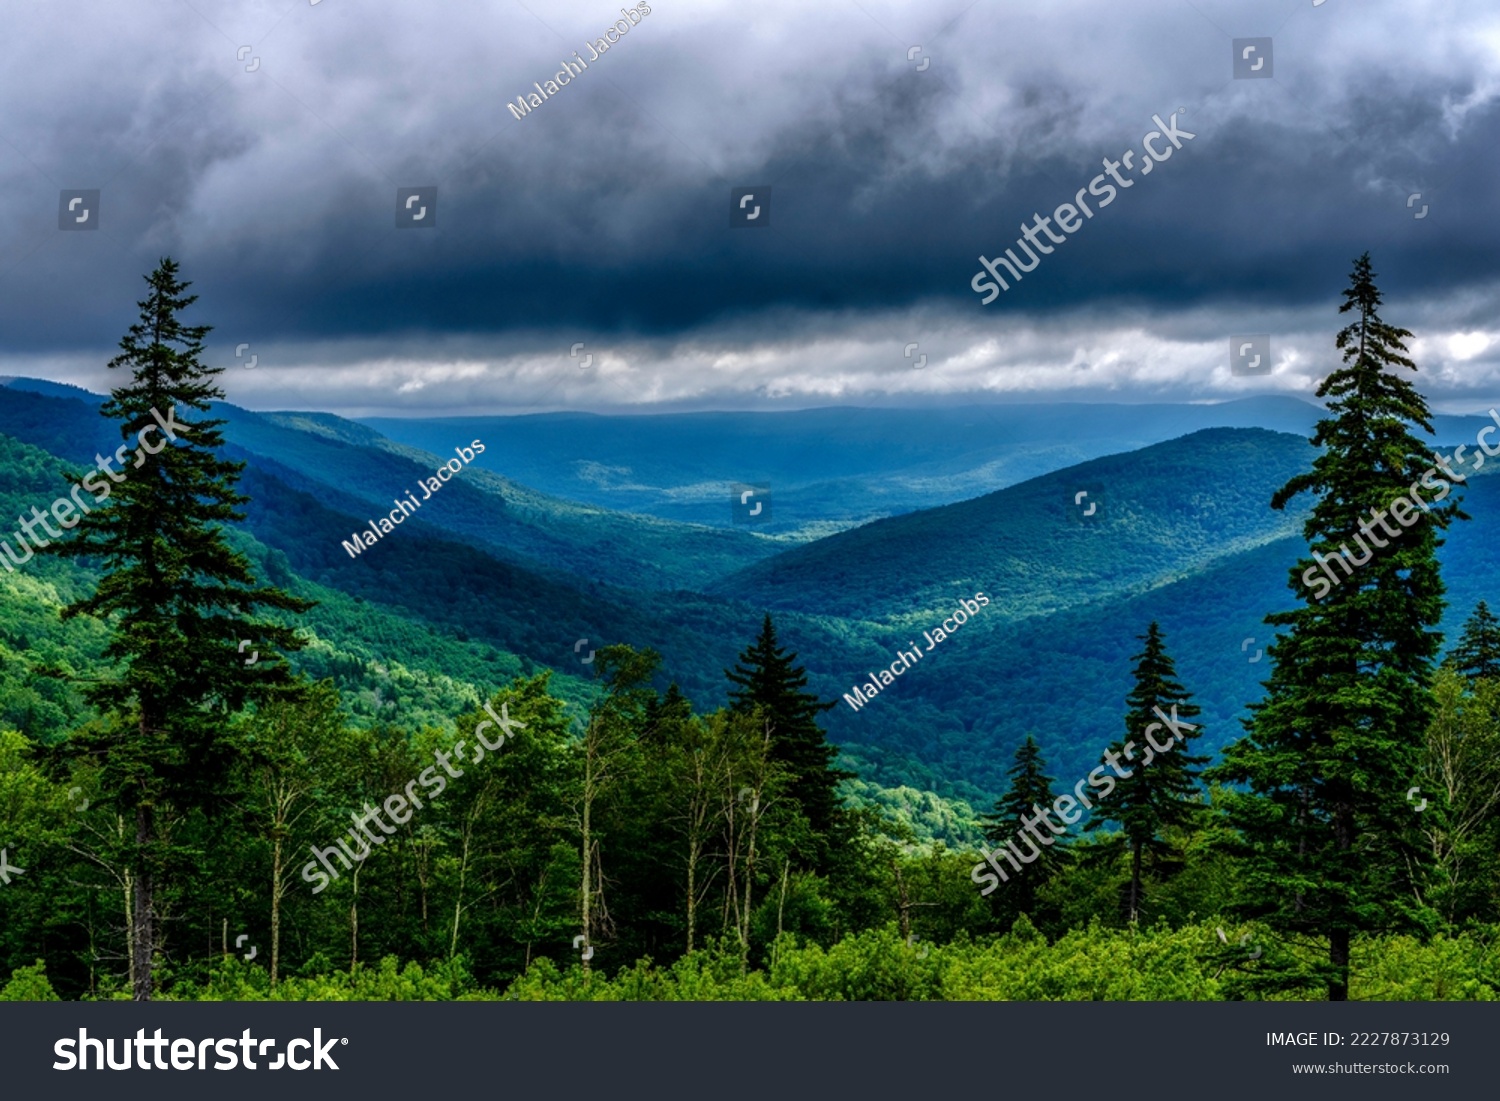 Summer storm clouds viewed along the Highland Scenic Highway, a  National Scenic Byway, Pocahontas County, West Virginia, USA #2227873129